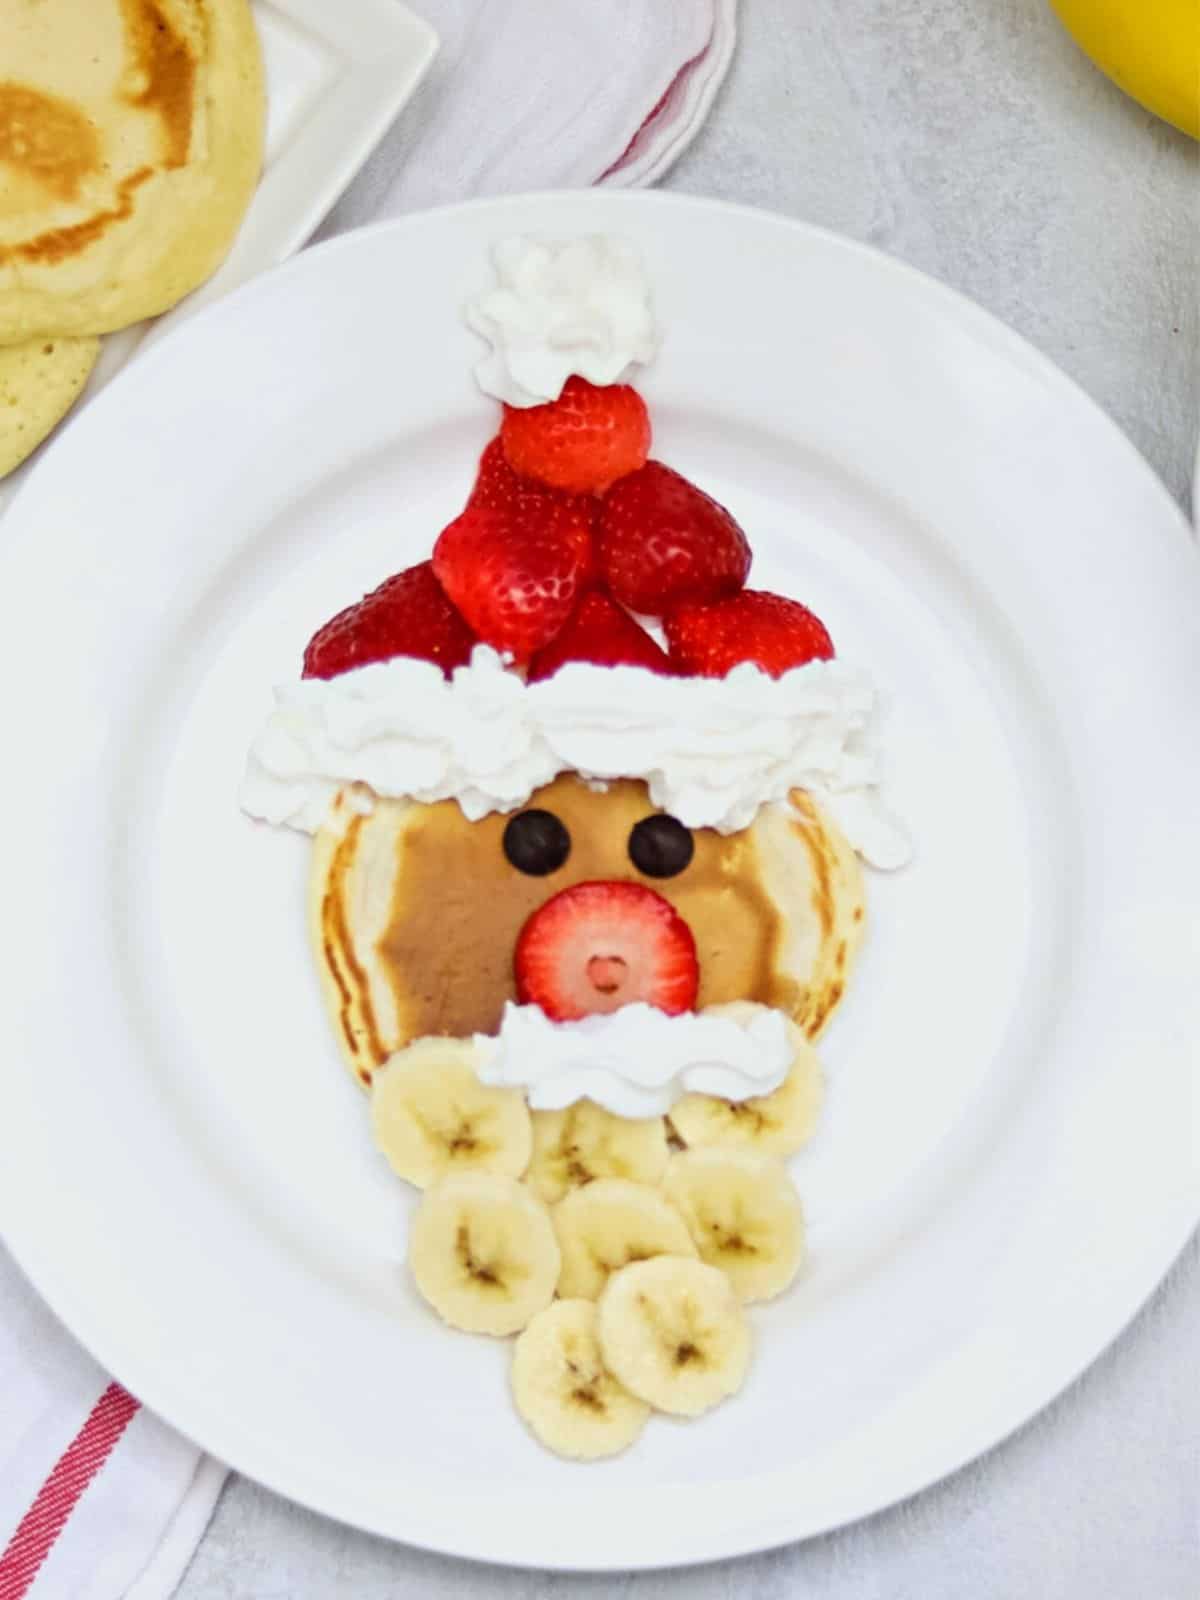 Santa shaped using a pancake, strawberries, whipped cream and bananas on white plate.